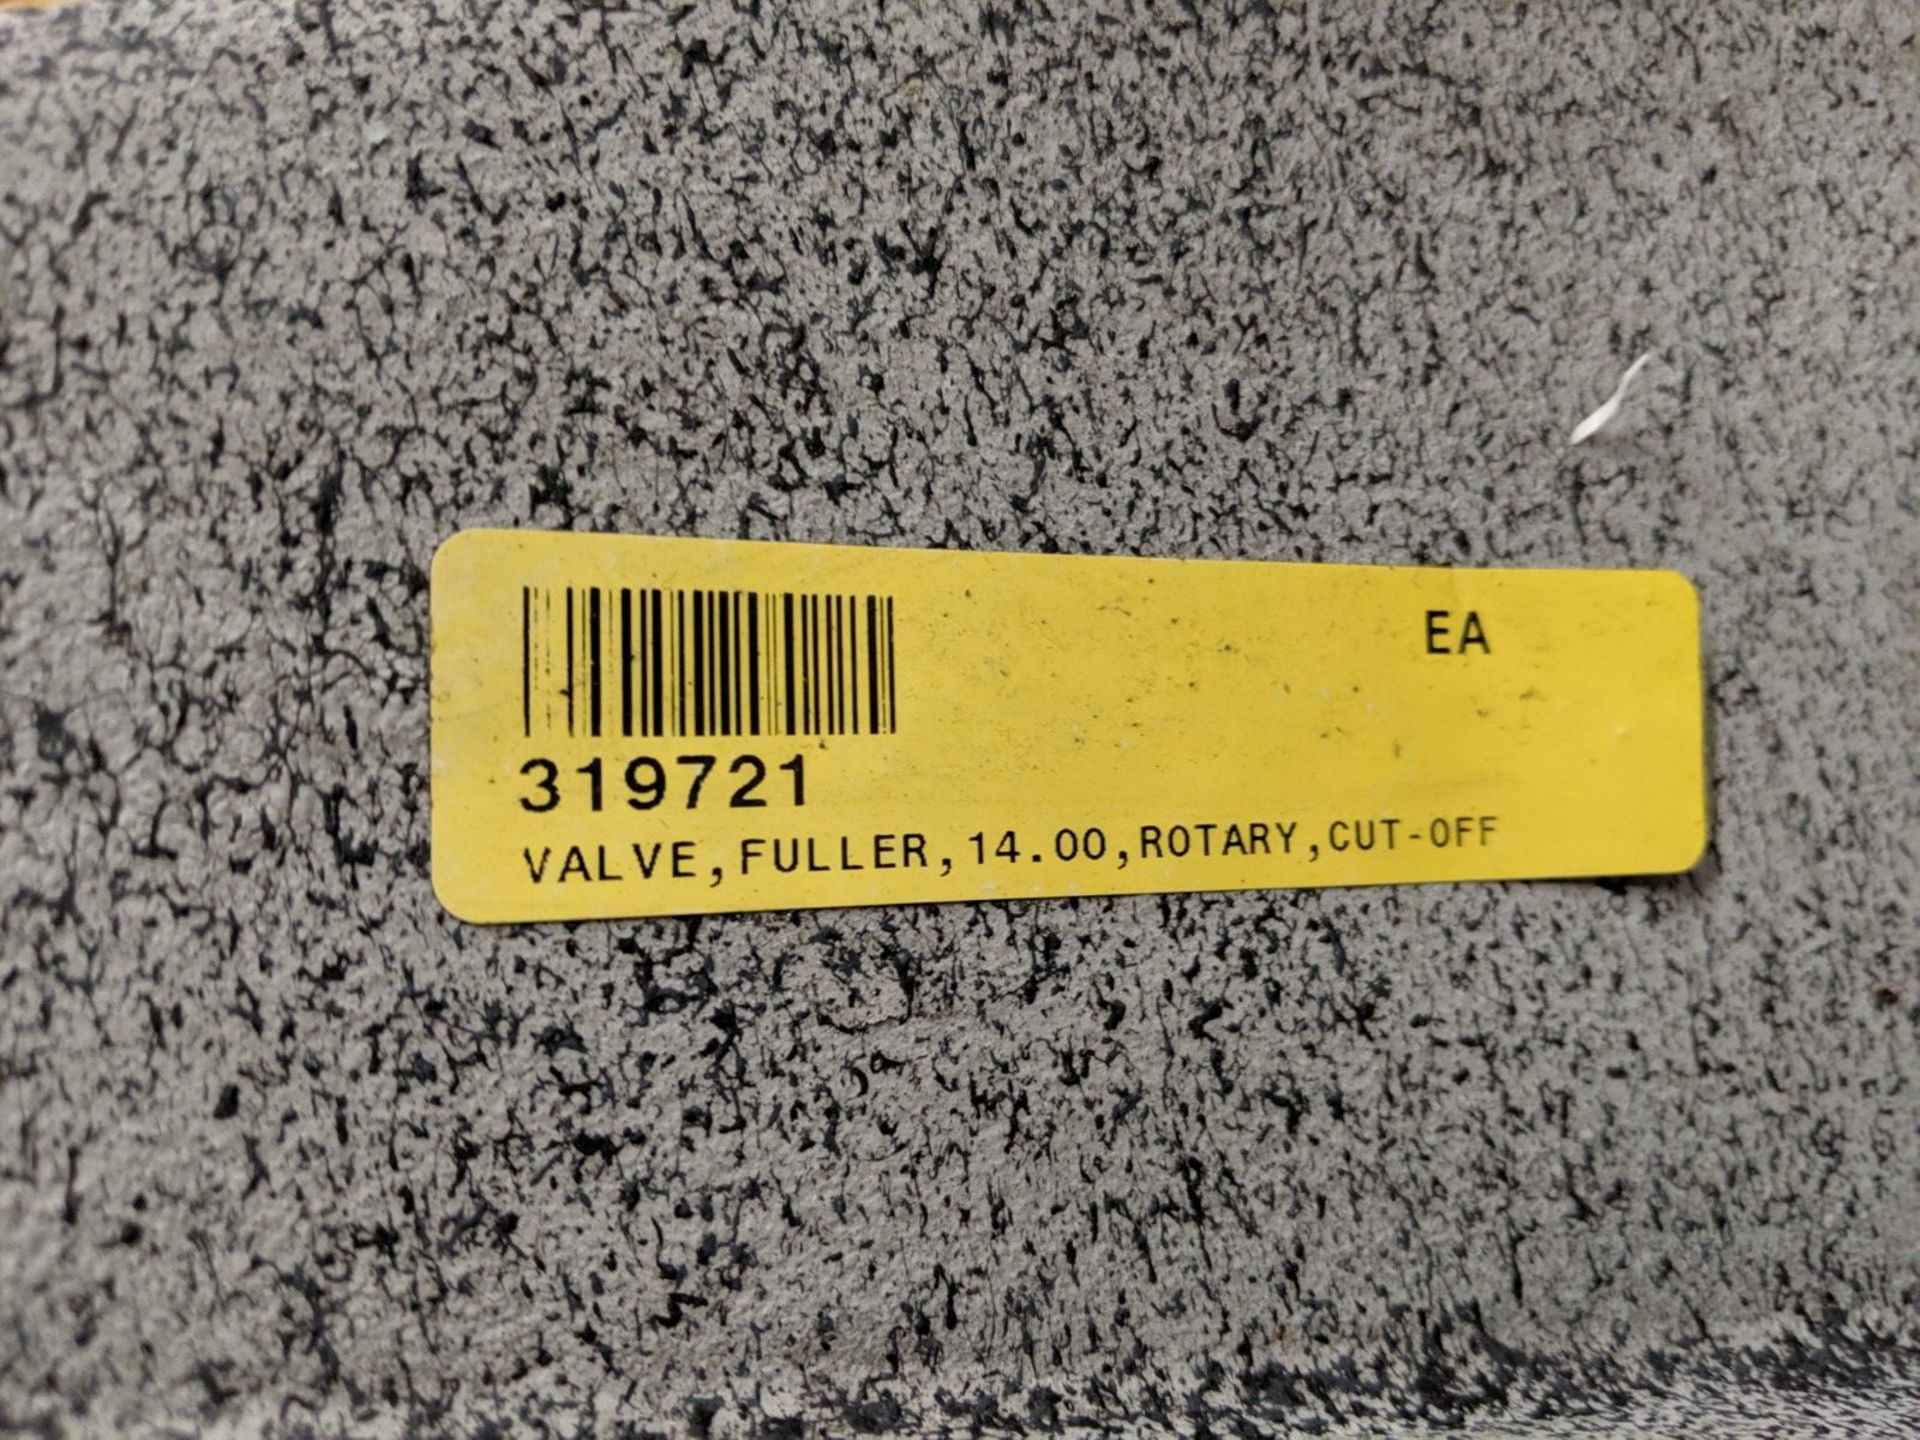 FL SMIDTH 14" X 14" ROTARY CUT-OFF VALVE, P/N 116-72-4-1037-04 ** MANUFACTURED BY FULLER KOVAKO ** - Image 3 of 5